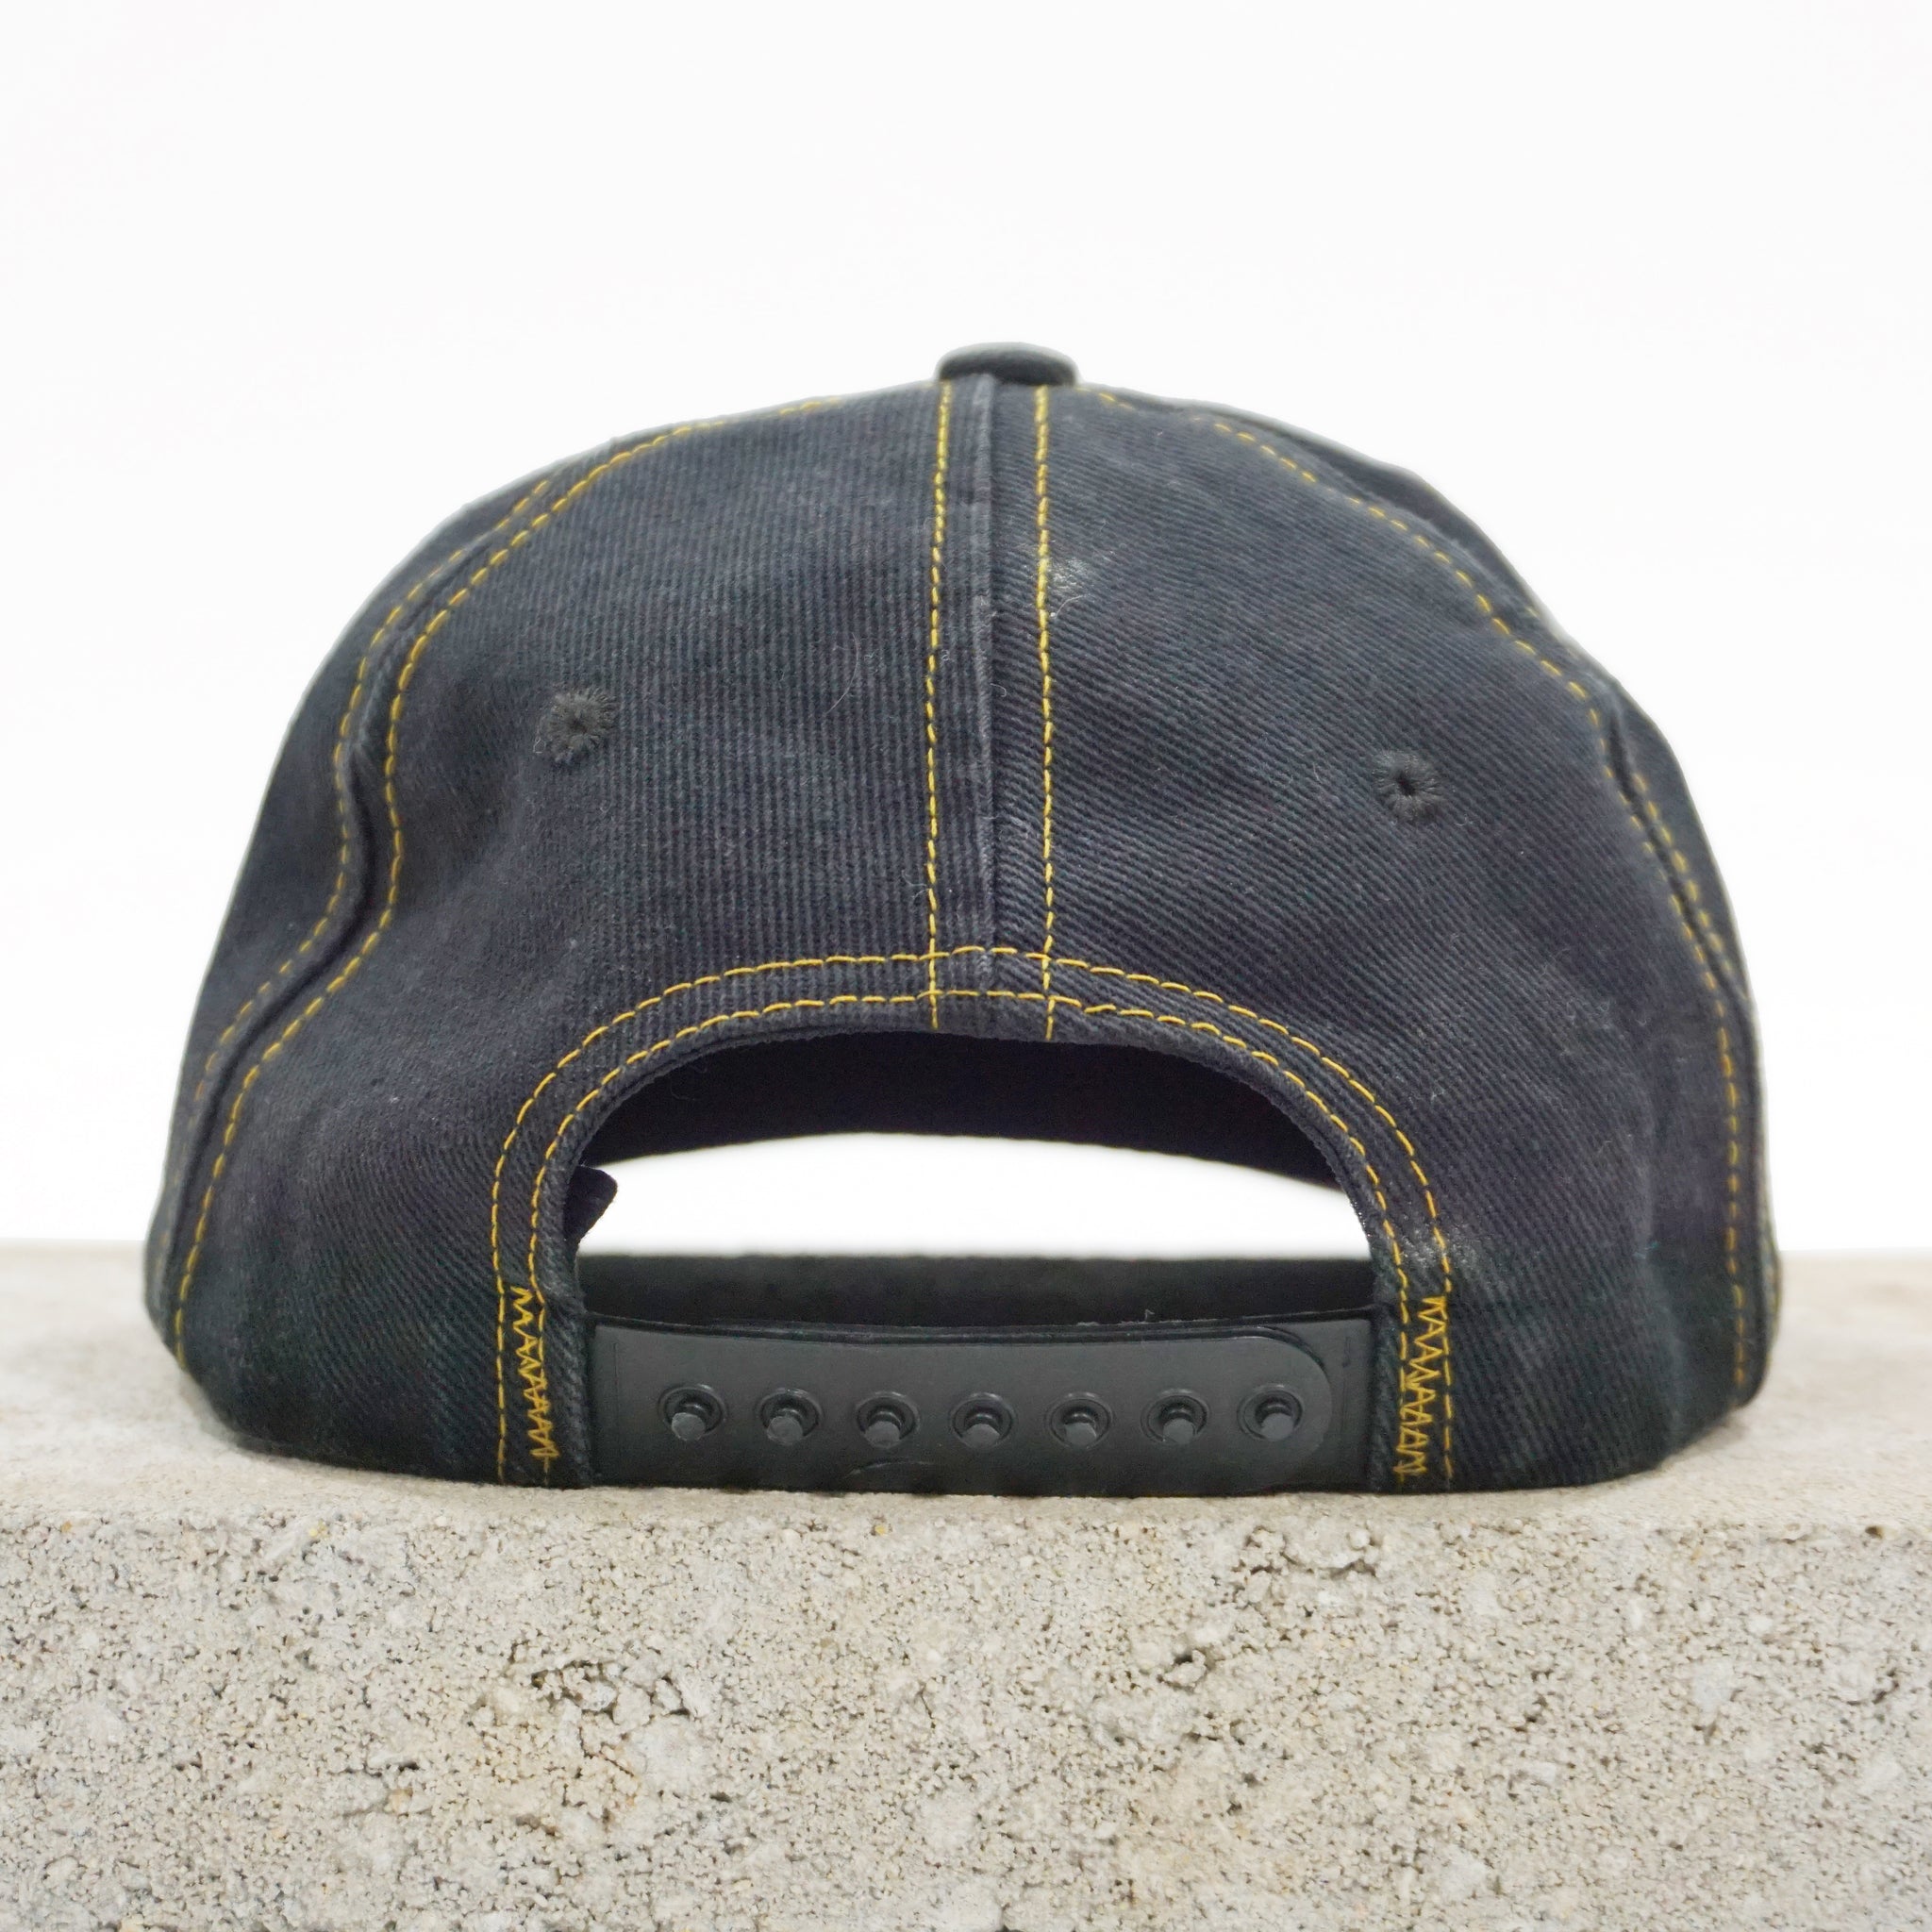 Dogpile - Contrast Hat (Faded Black)